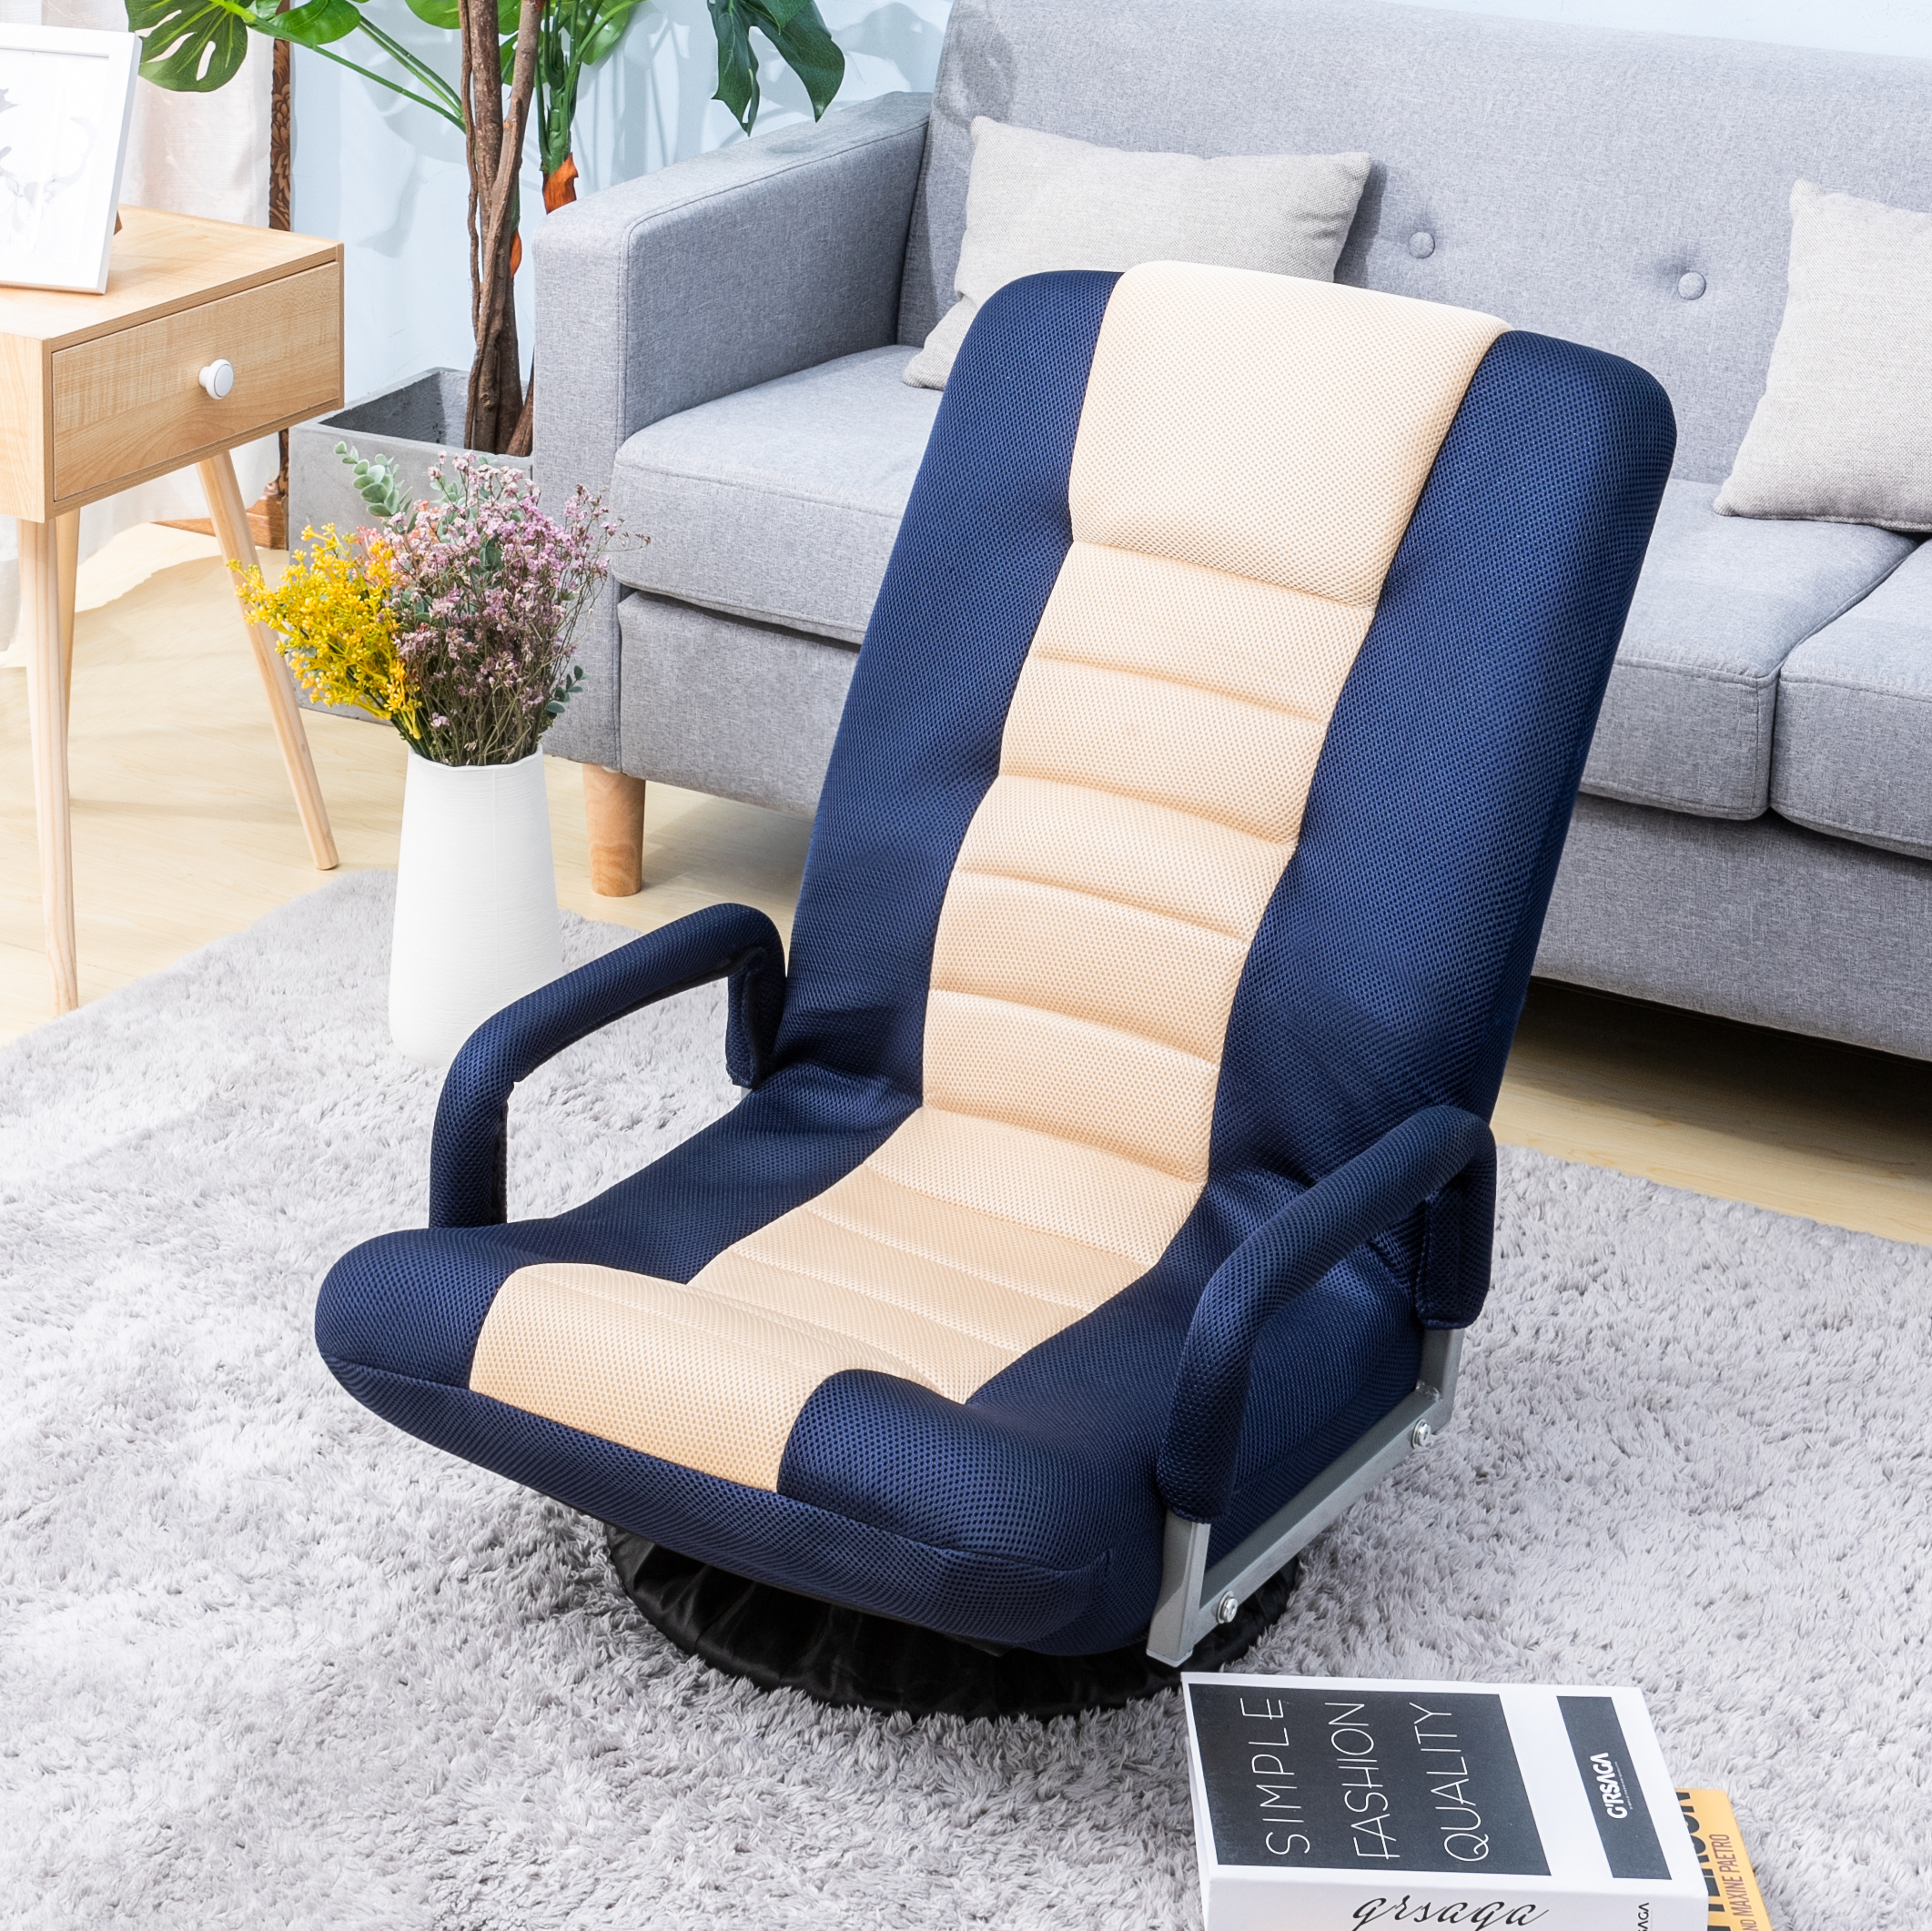 Swivel Video Rocker Gaming Chair, Floor Gaming Chair Adjustable 7-Position Swivel Chair Folding Sofa Lounger, Highback Rocking Video Gaming Floor Chair with Armrest for Kids Teens Adults, Q12554 - image 2 of 11